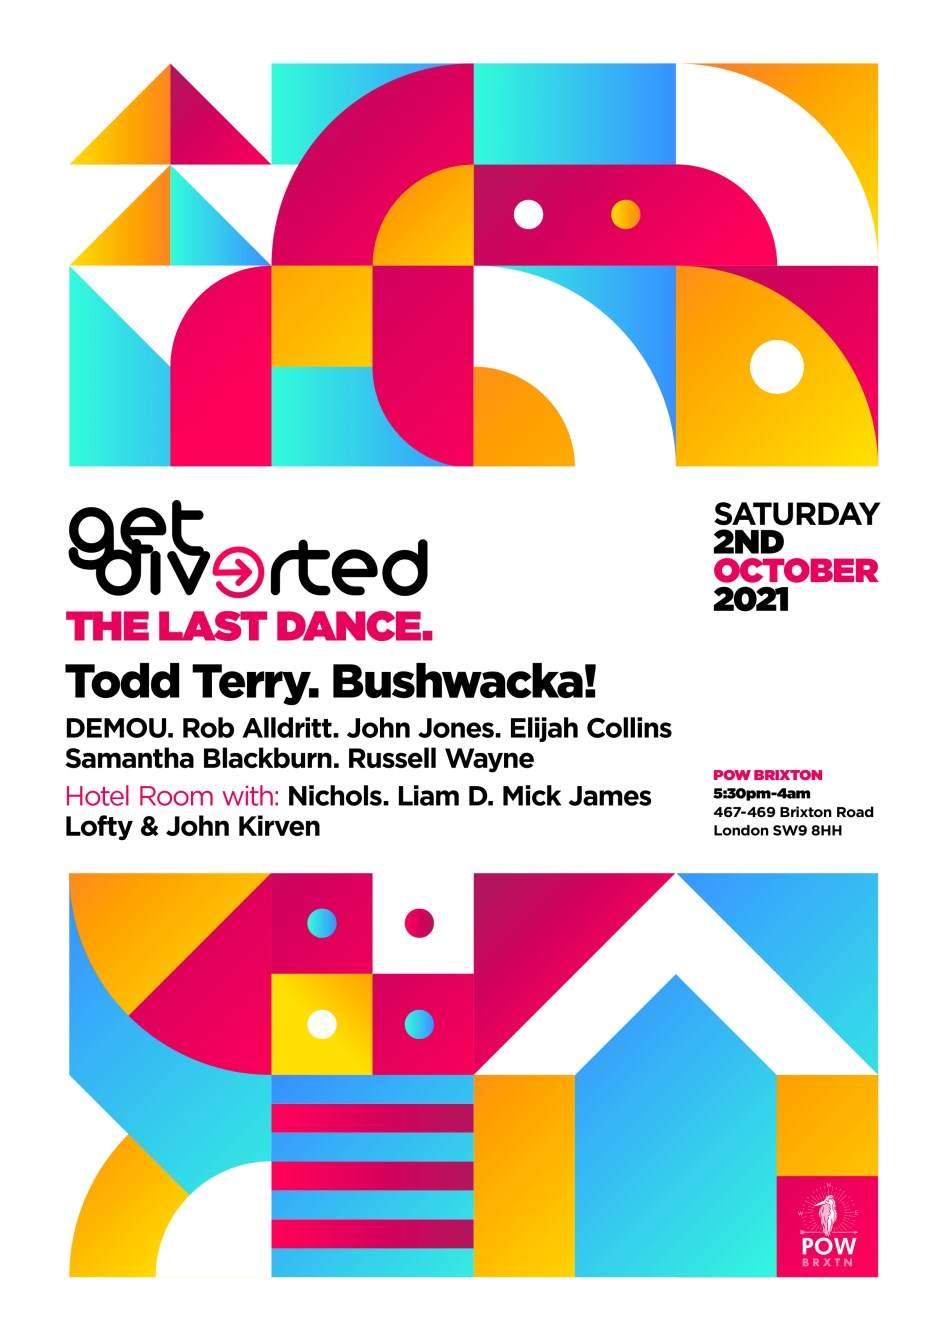 Get Diverted - The Last Dance with Todd Terry & Bushwacka - フライヤー表